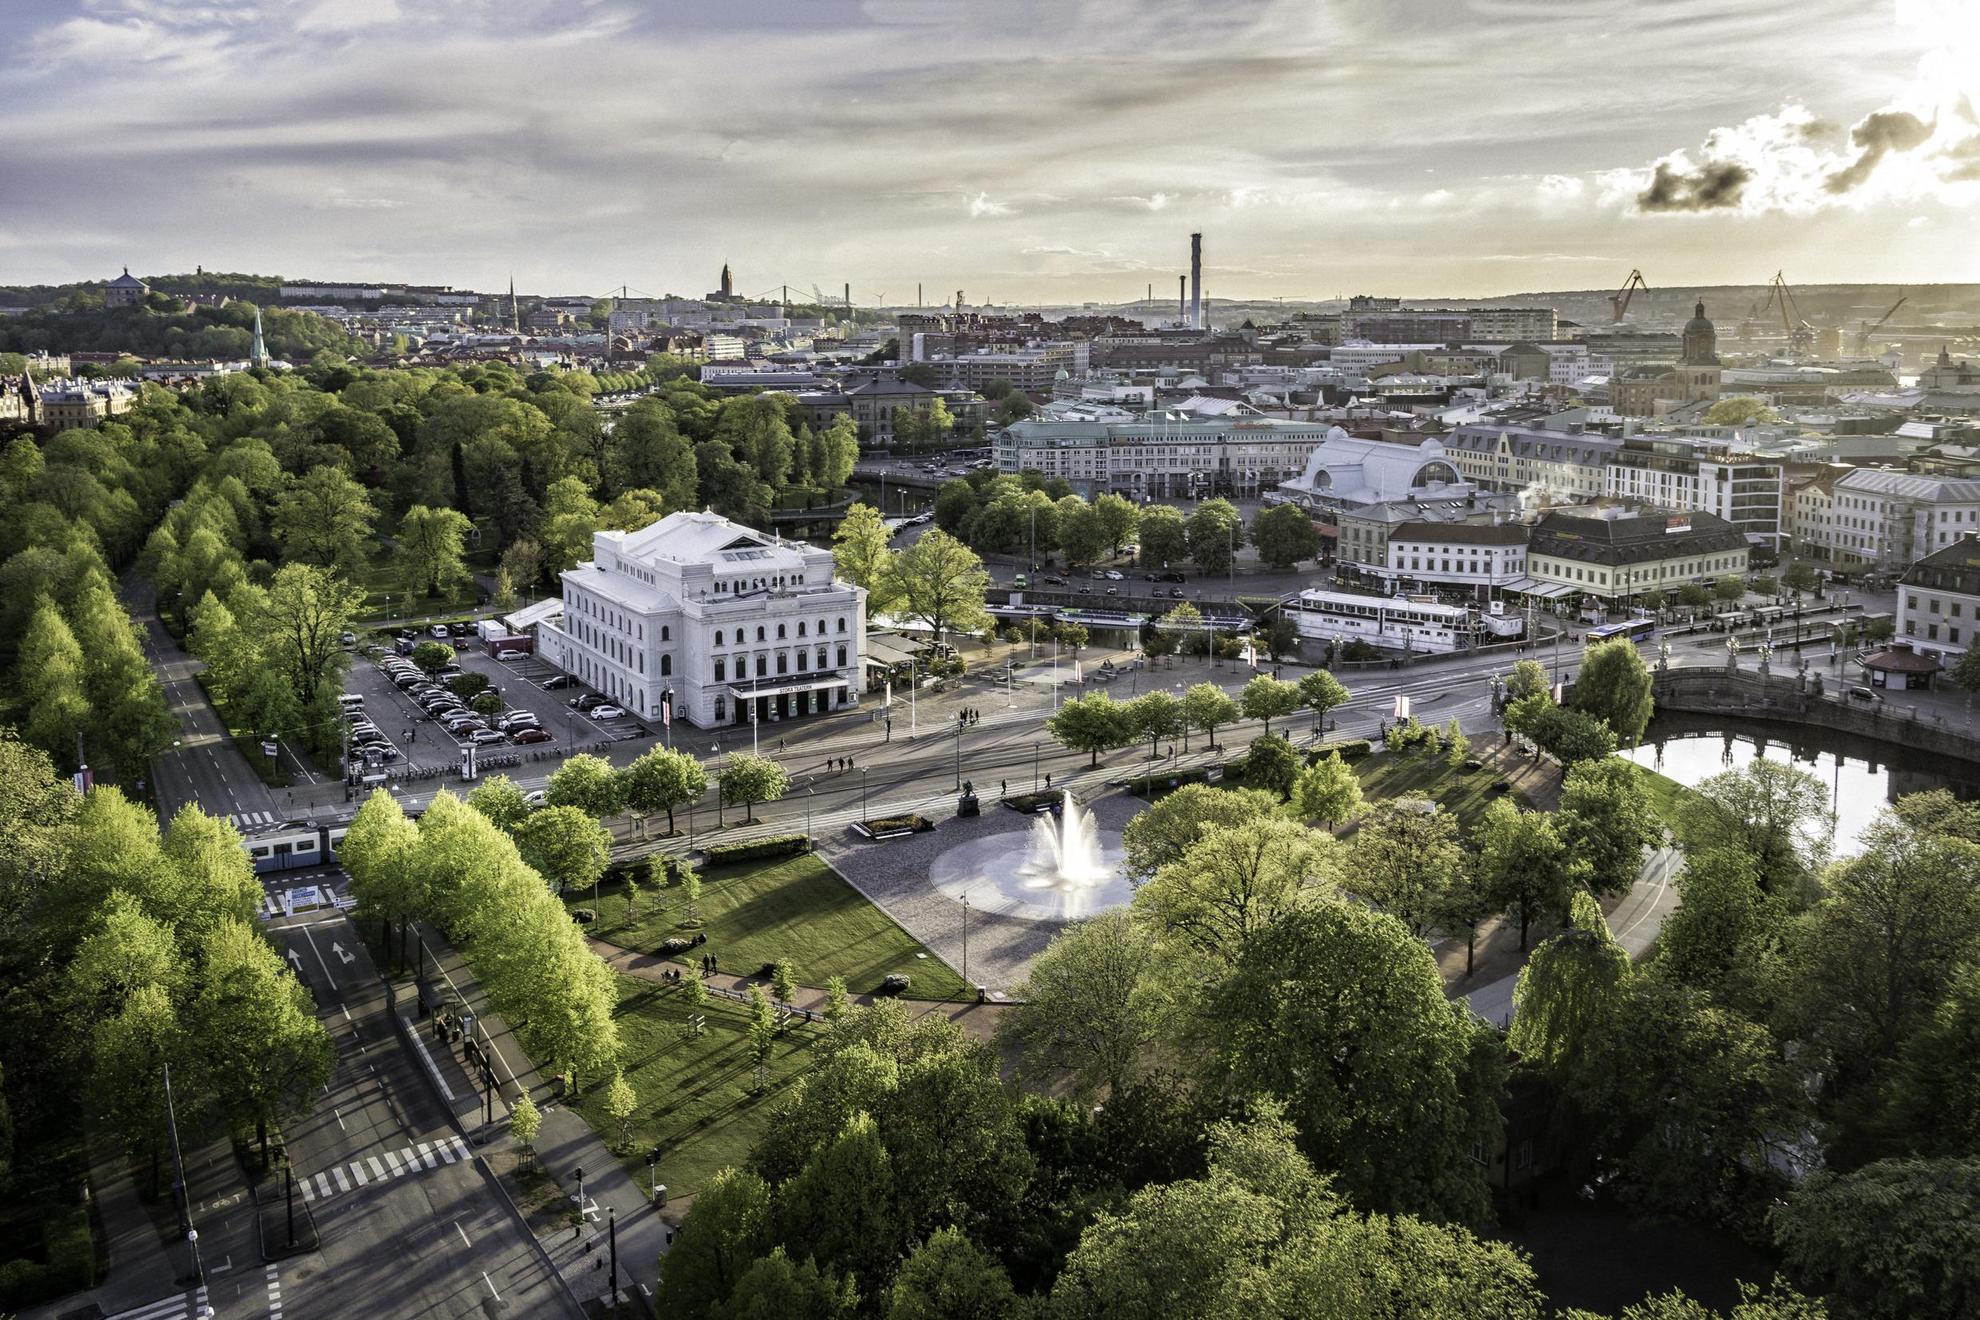 Aerial view of Gothenburg. A large white building, a fountain and lush greenery in the foreground.